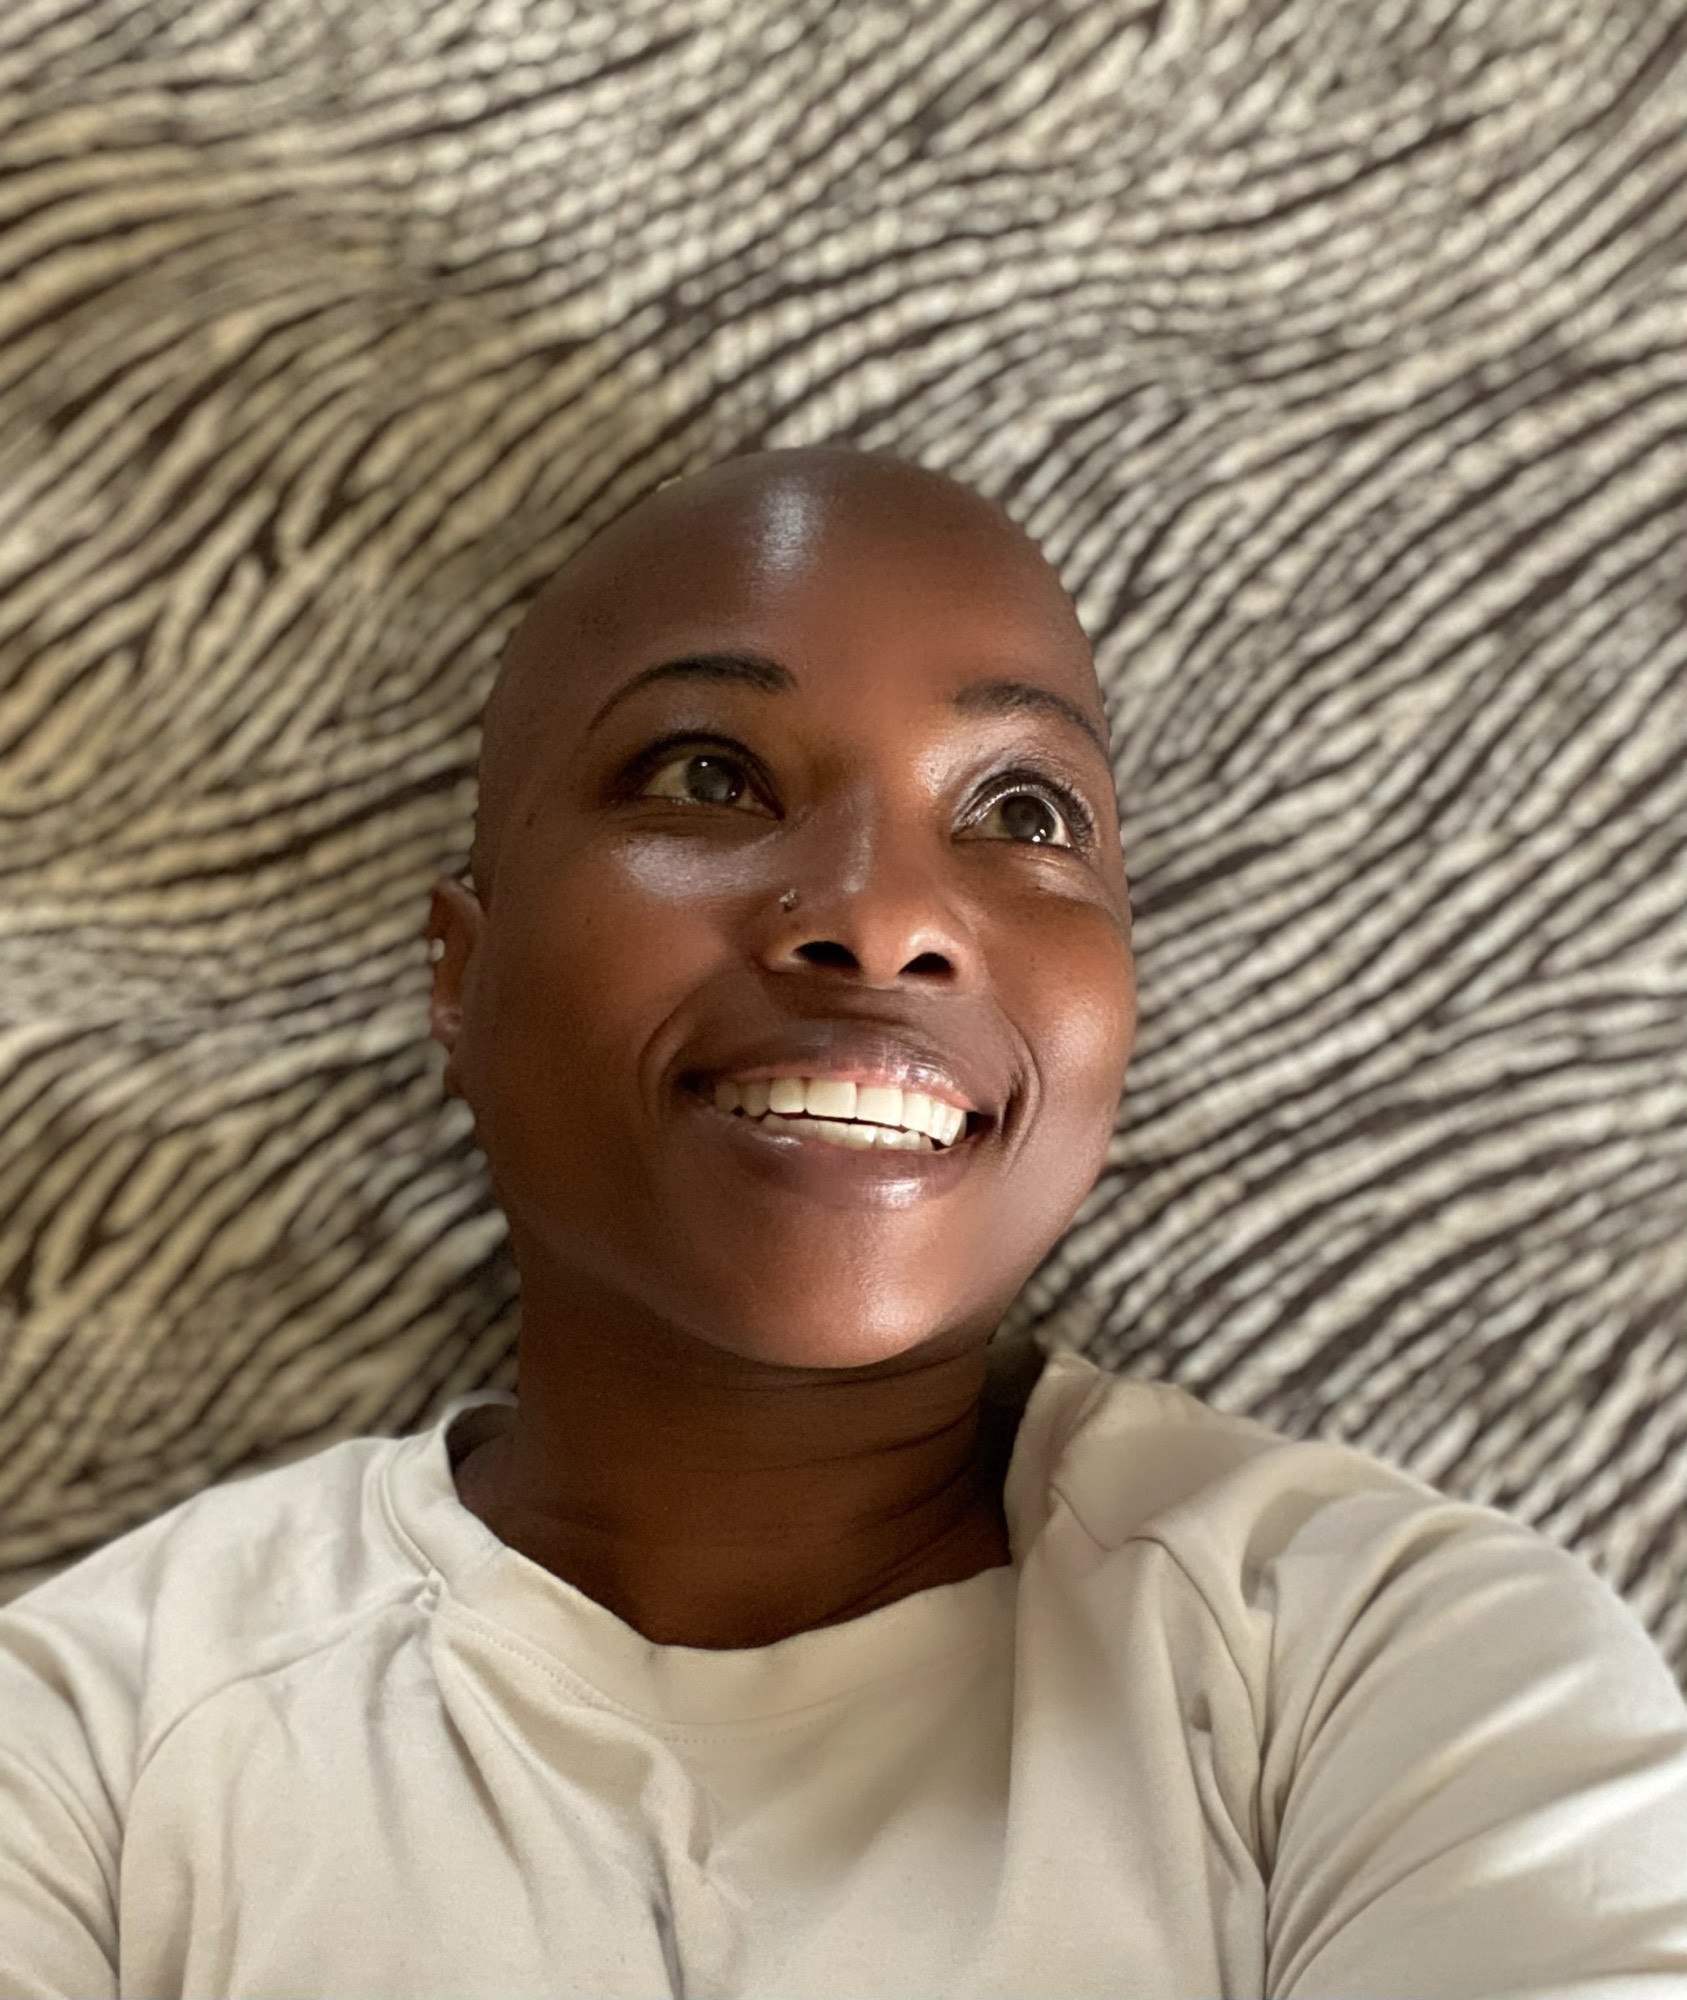 Selfie of Dr. Duncan, a black woman, smiling while looking off to the right of the camera